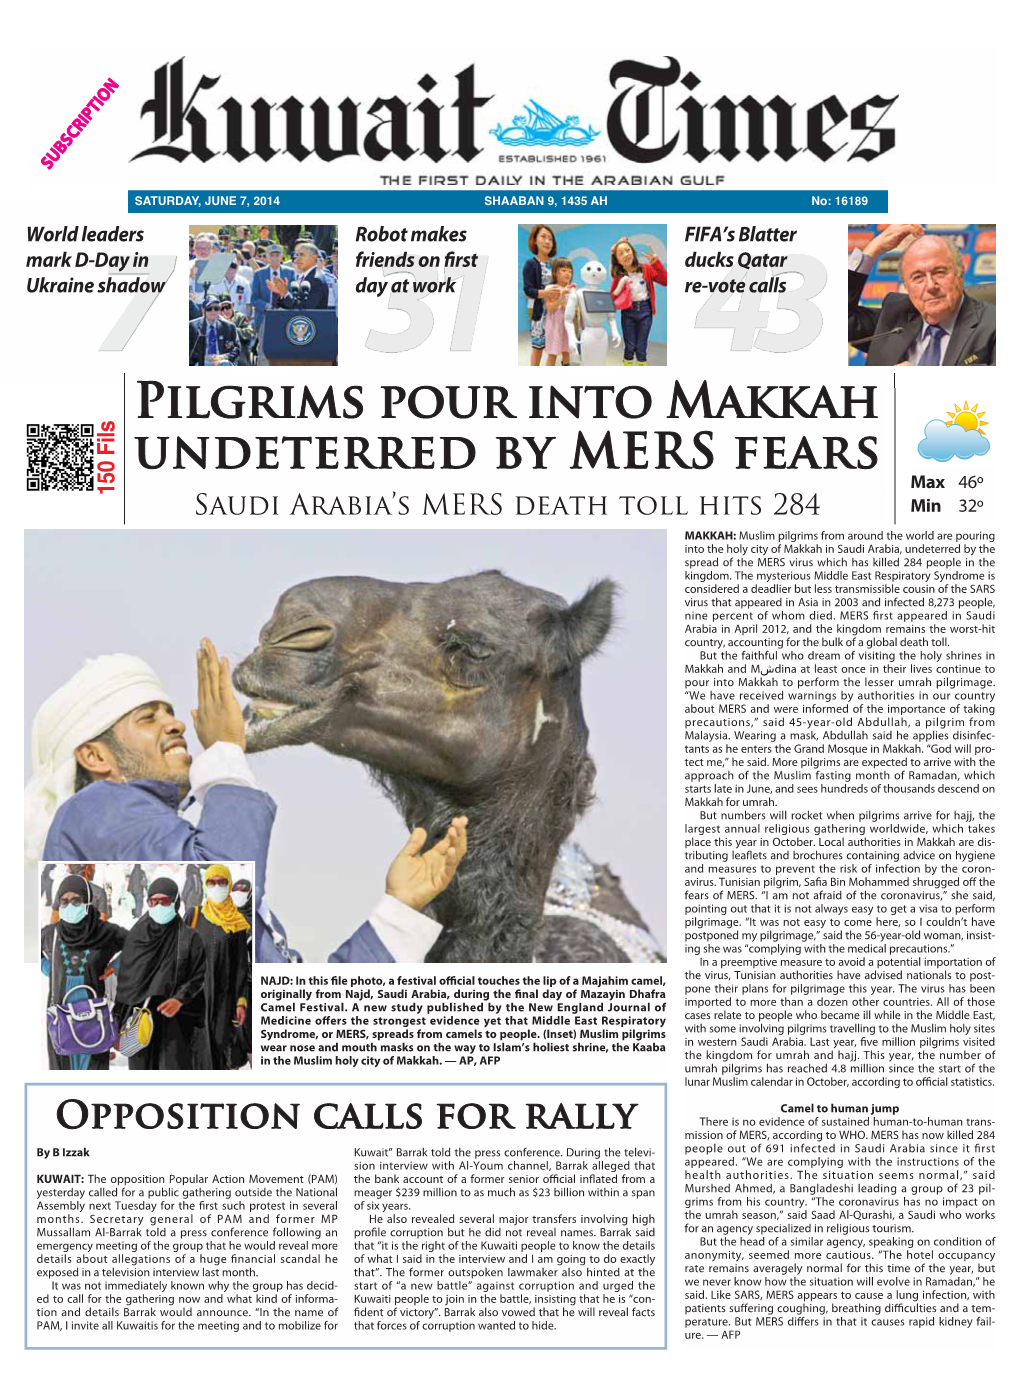 Pilgrims Pour Into Makkah Undeterred by MERS Fears